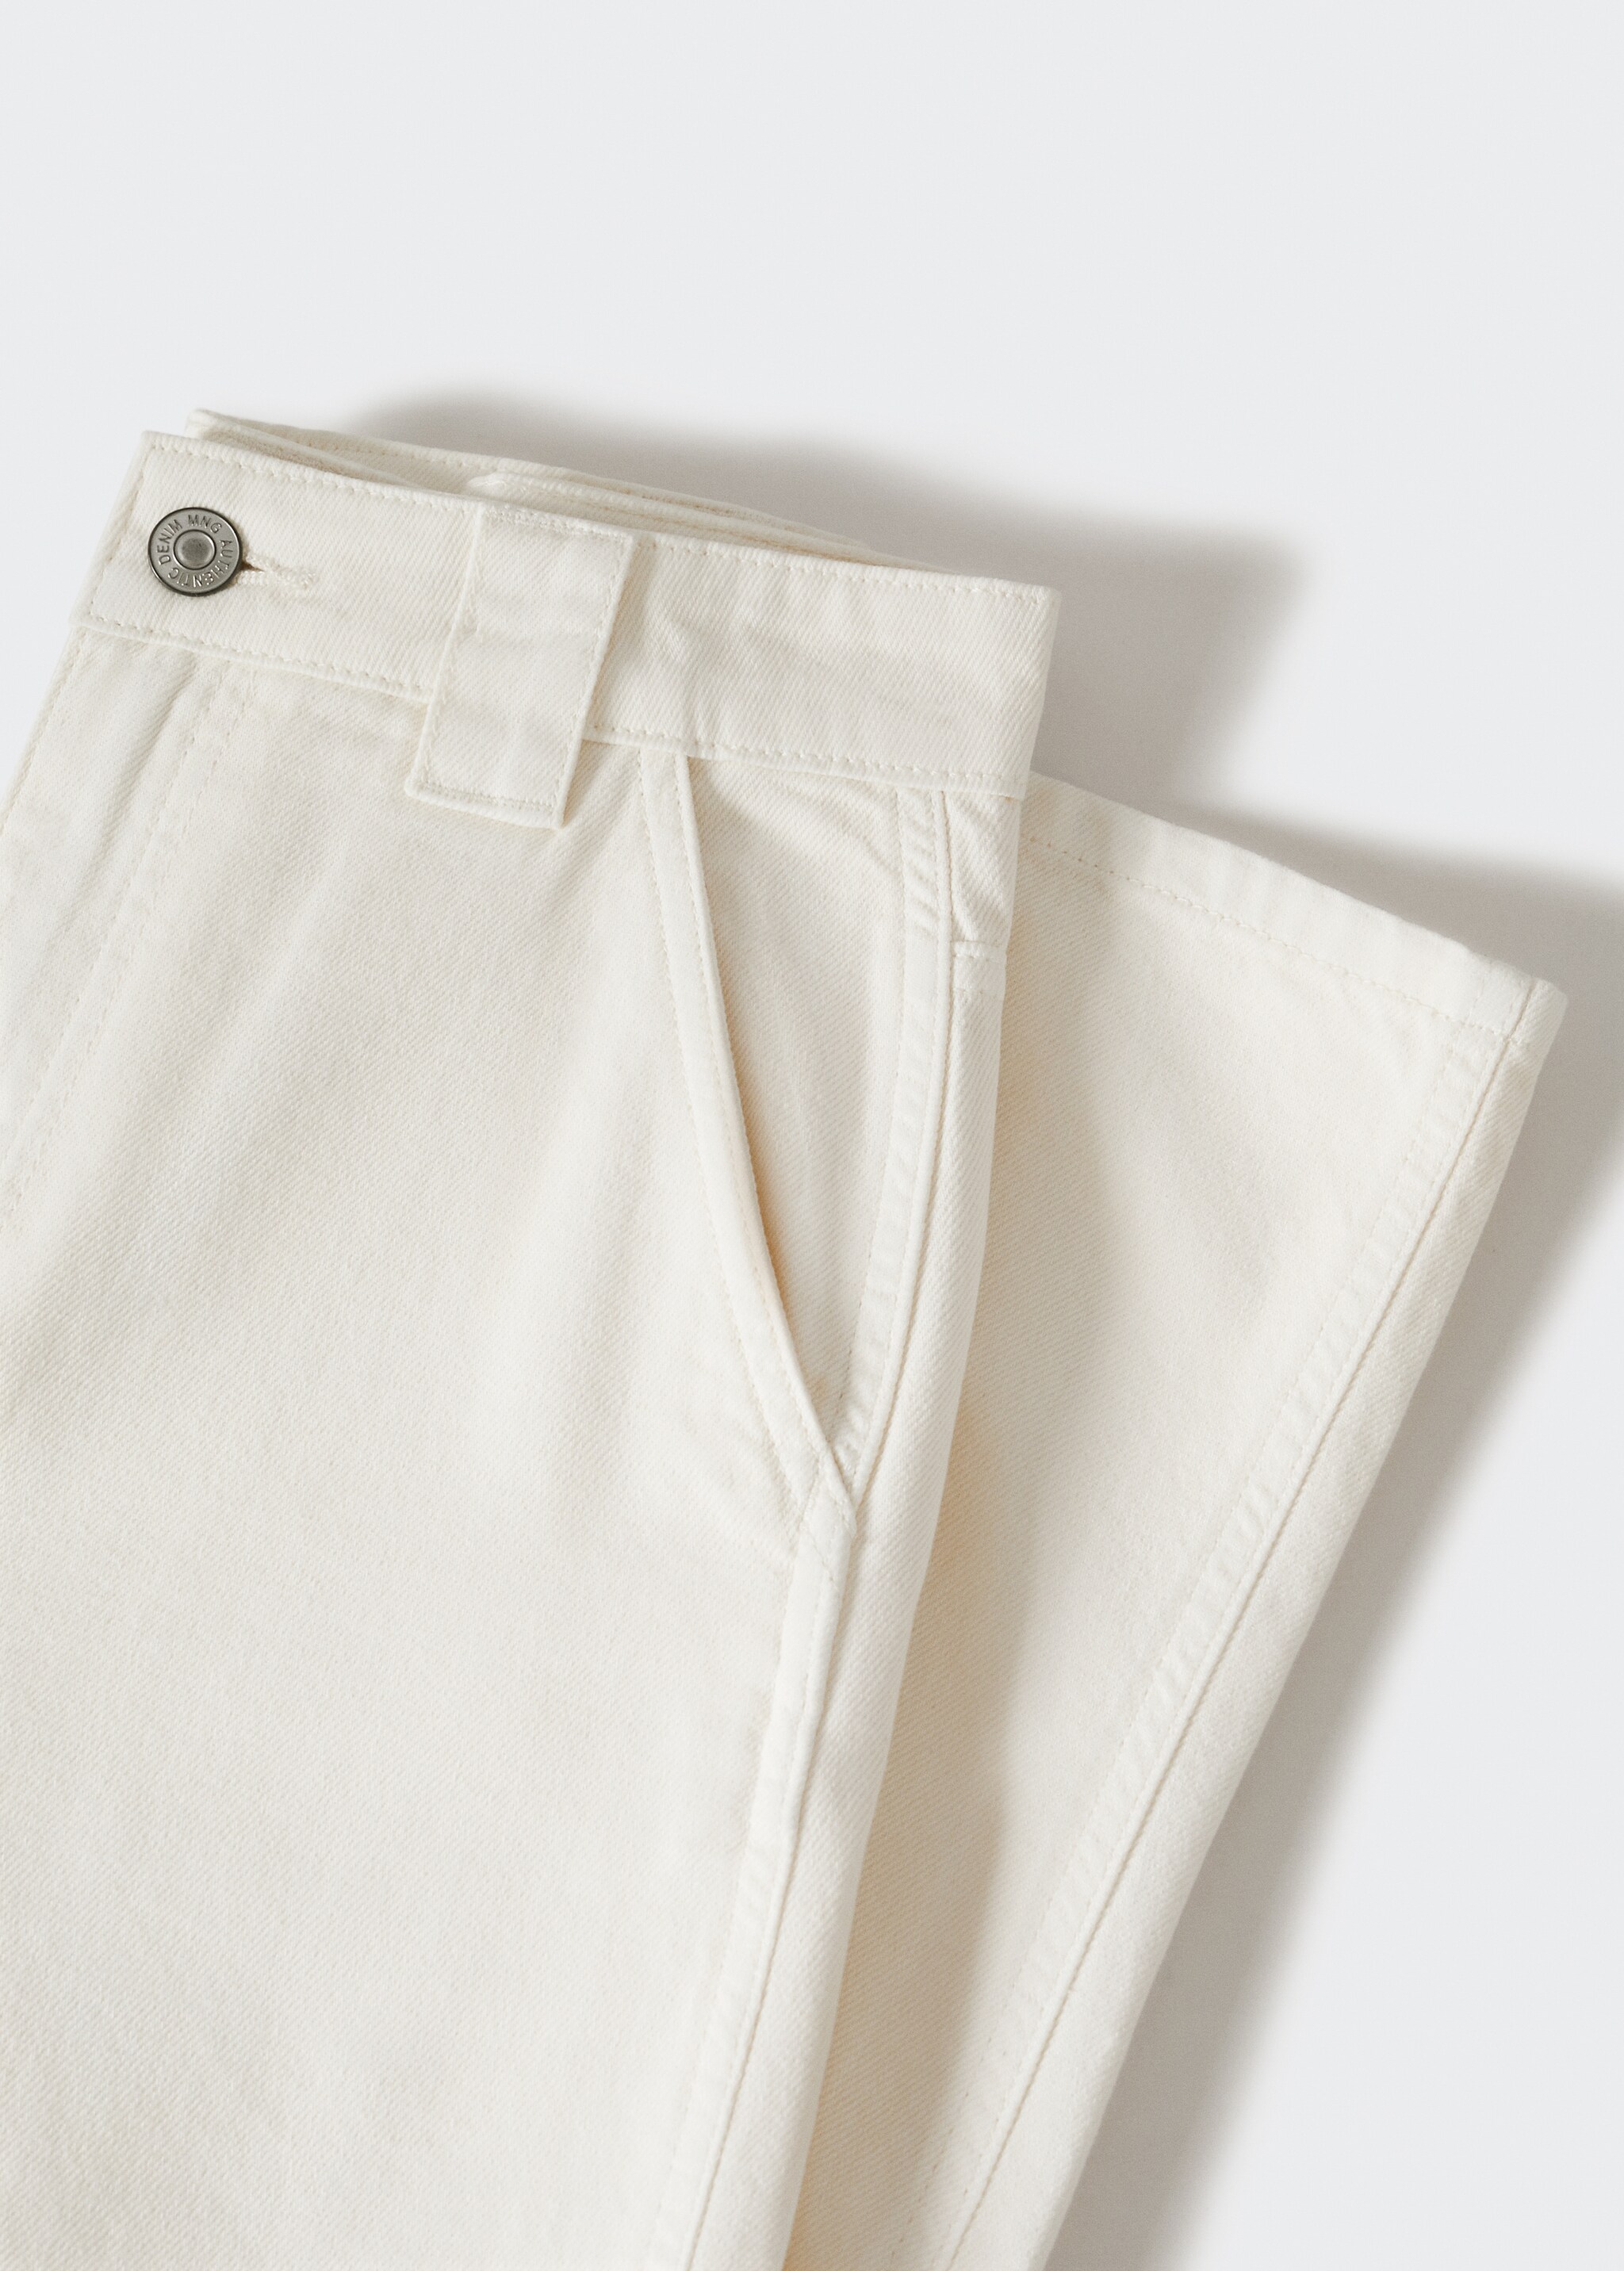 Cotton cargo trousers - Details of the article 8